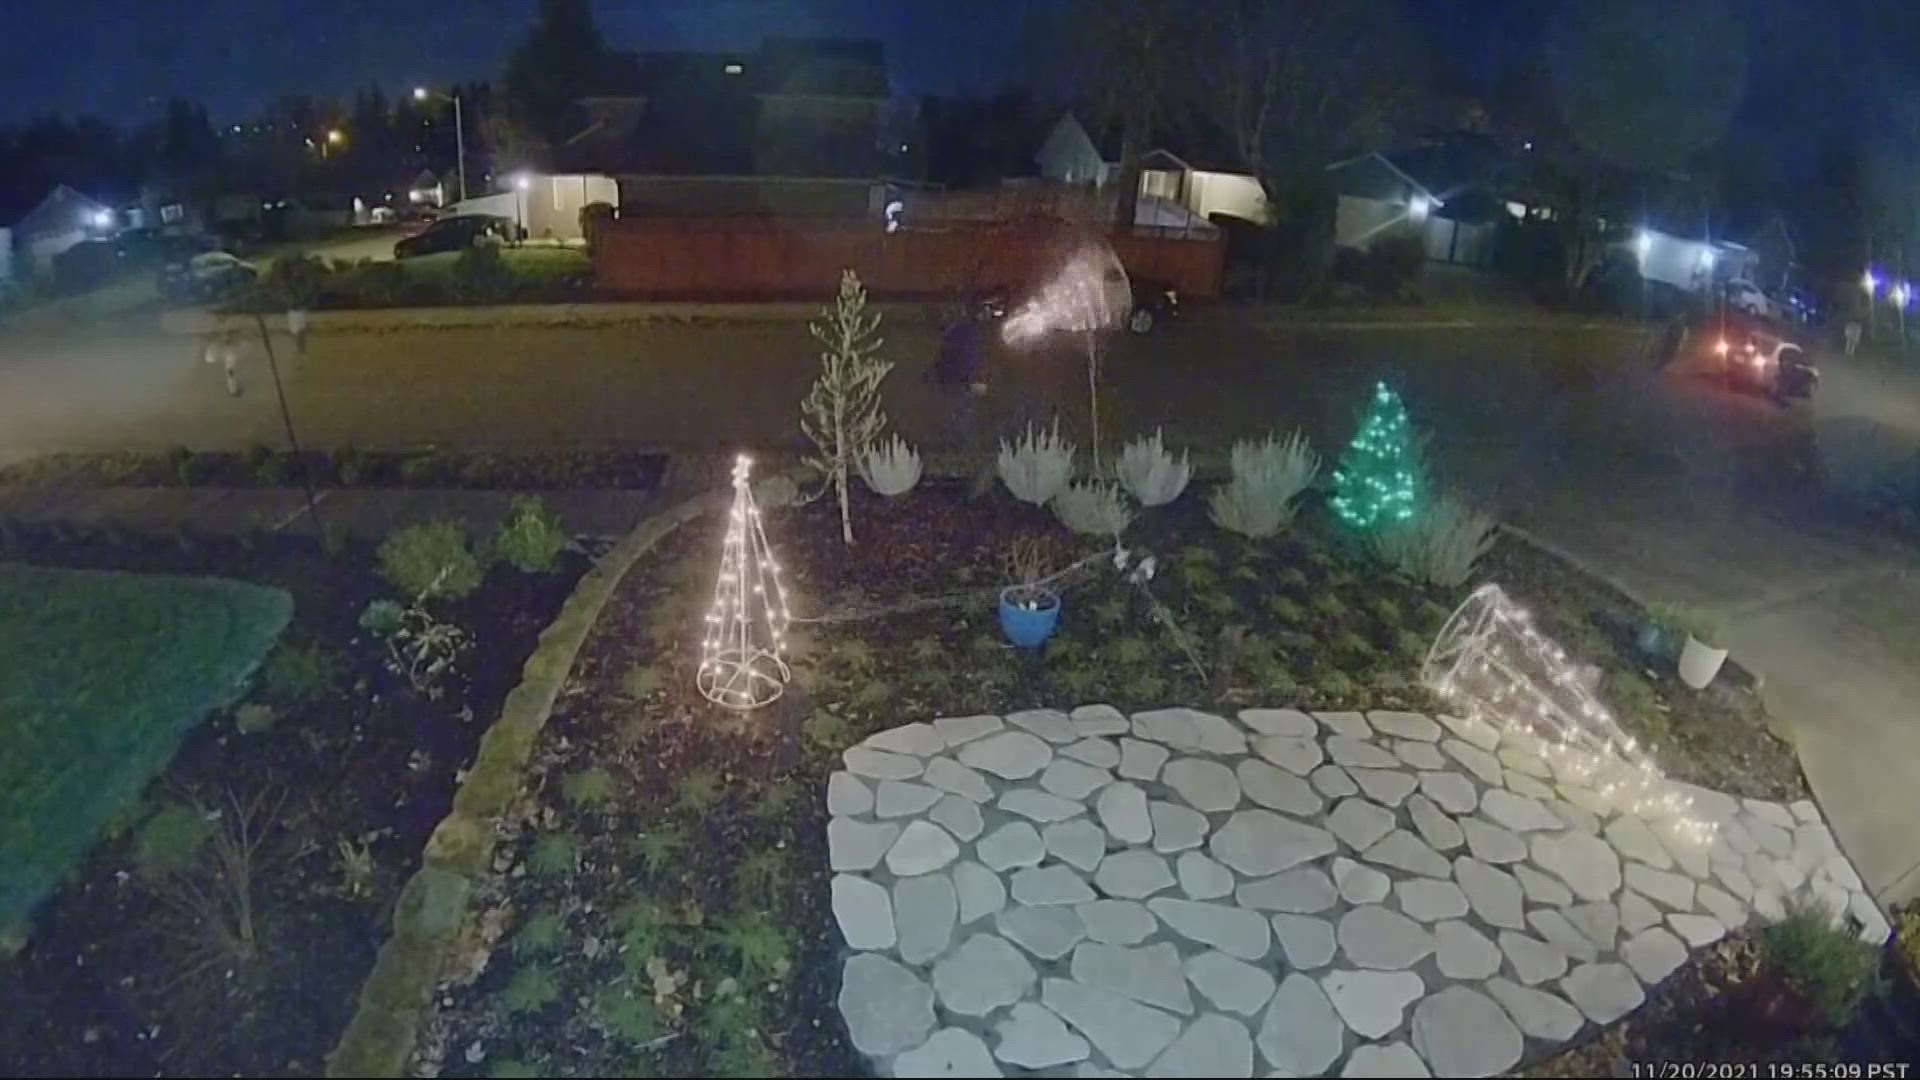 Home surveillance videos around the city show what appears to be a group of youth trashing holiday decorations, stealing, and throwing eggs at houses and cars.